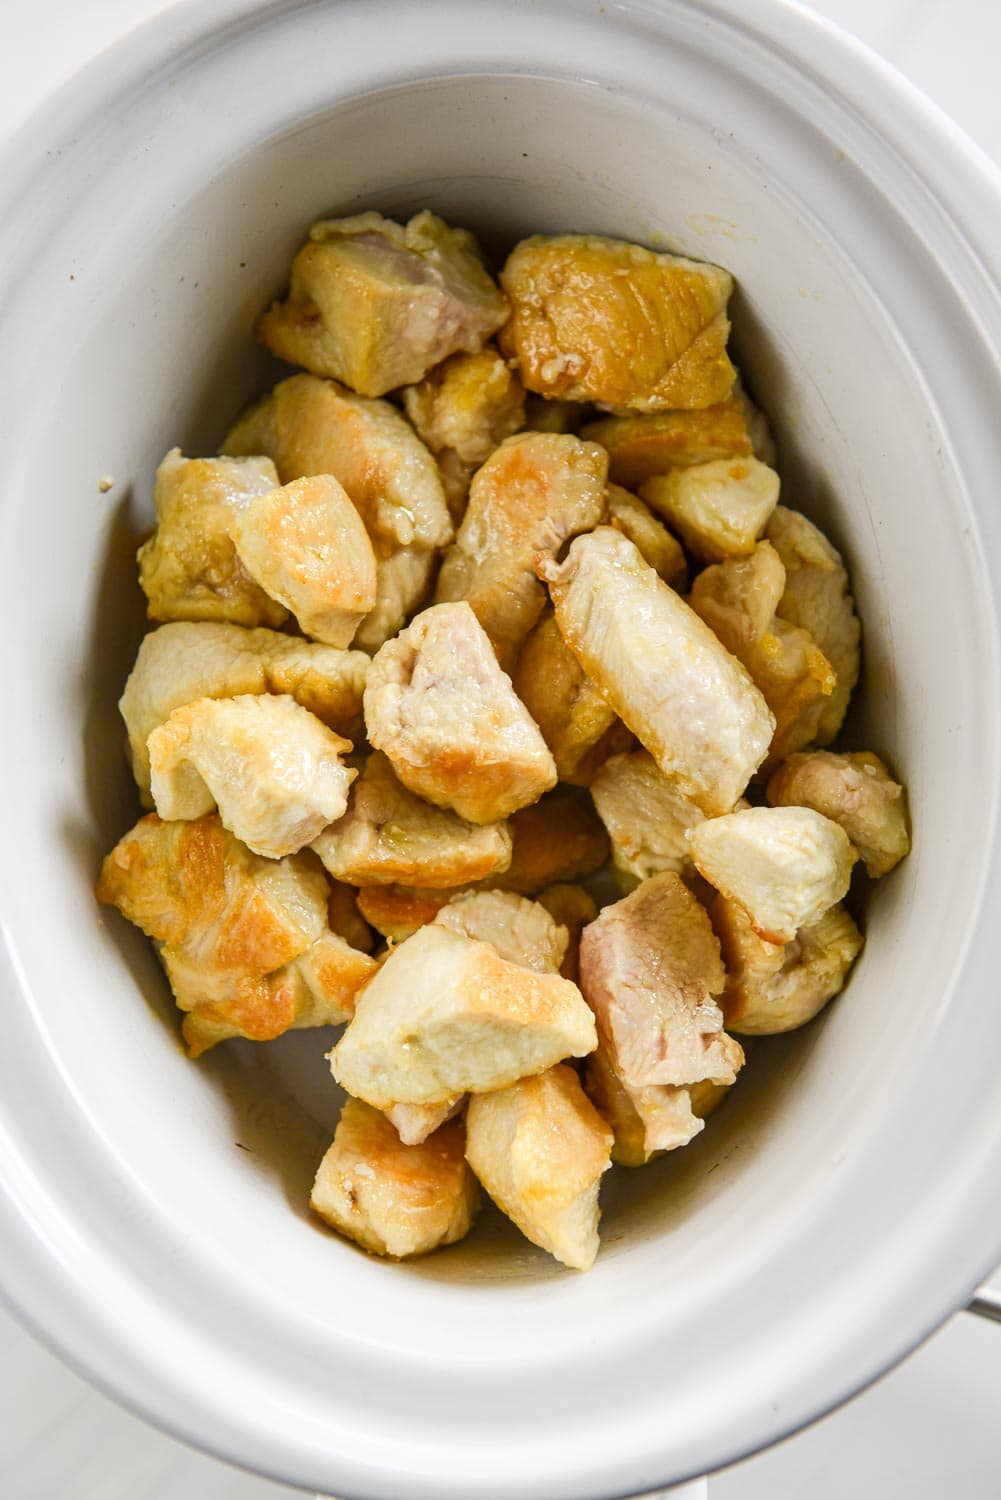 Browned chicken pieces in slow cooker